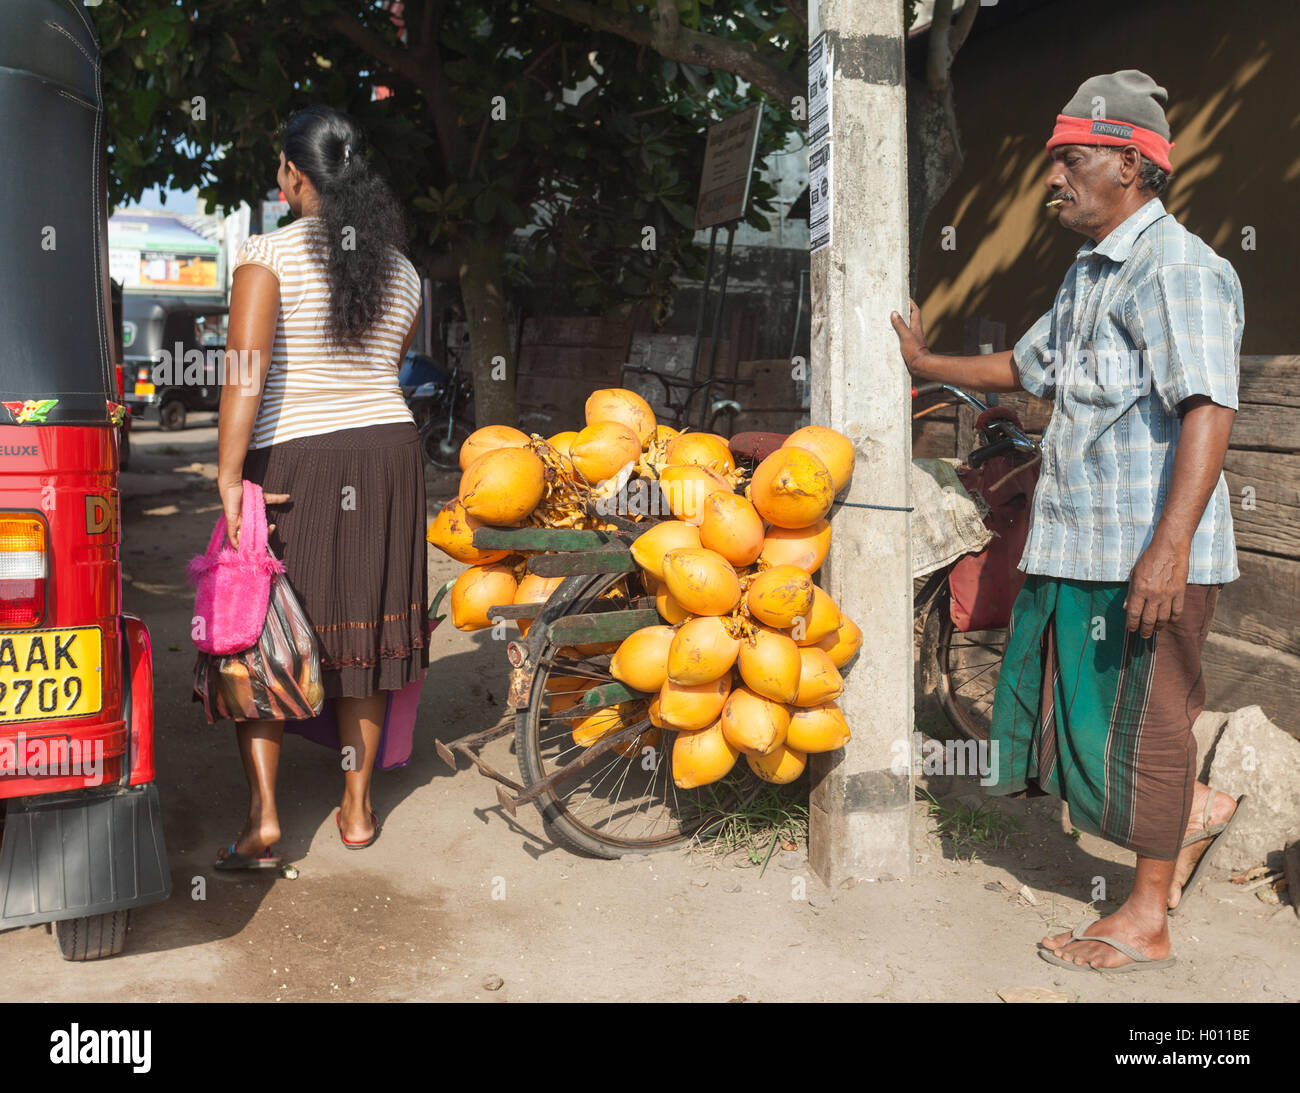 HIKKADUWA, SRI LANKA - MARCH 9, 2014: Local man selling fruit on his bike at street. Cycling is the main transportation for the Stock Photo